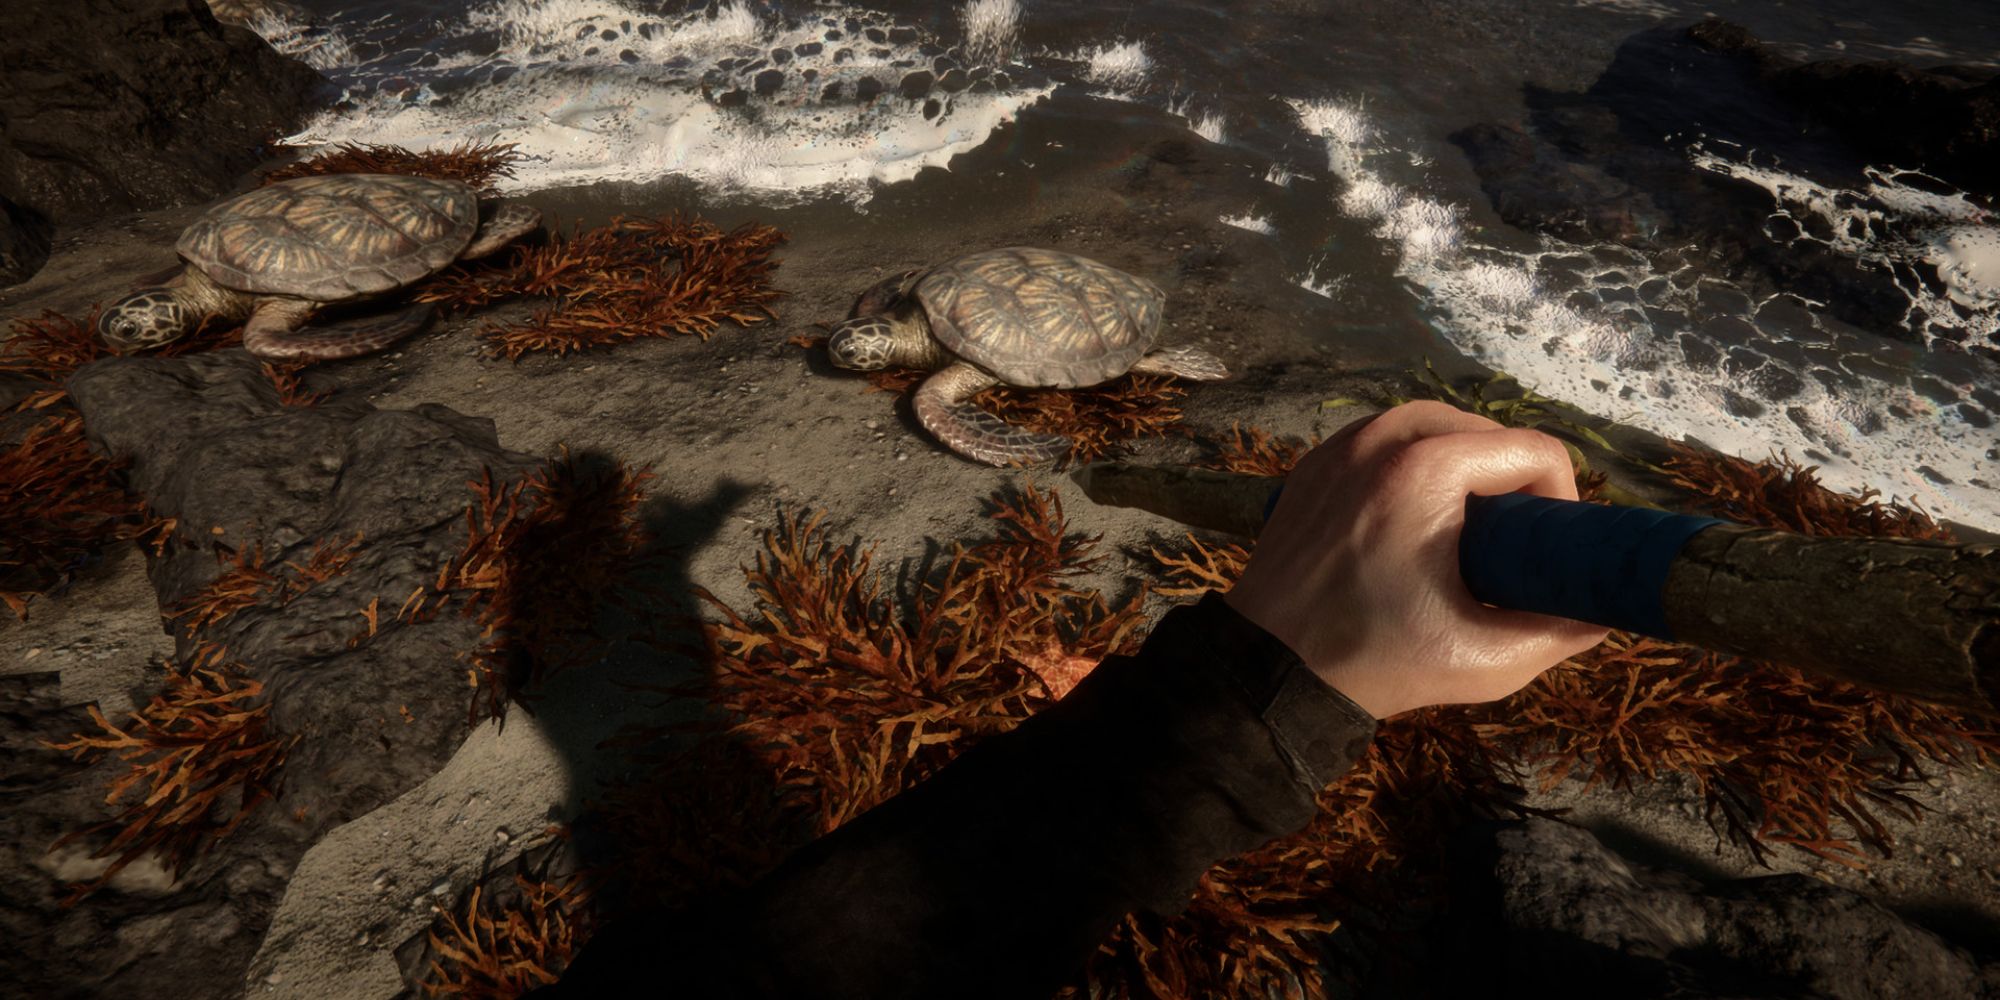 An image of the Craftable Spear from Sons Of The Forest, with the player wielding a spear to attack a turtle.